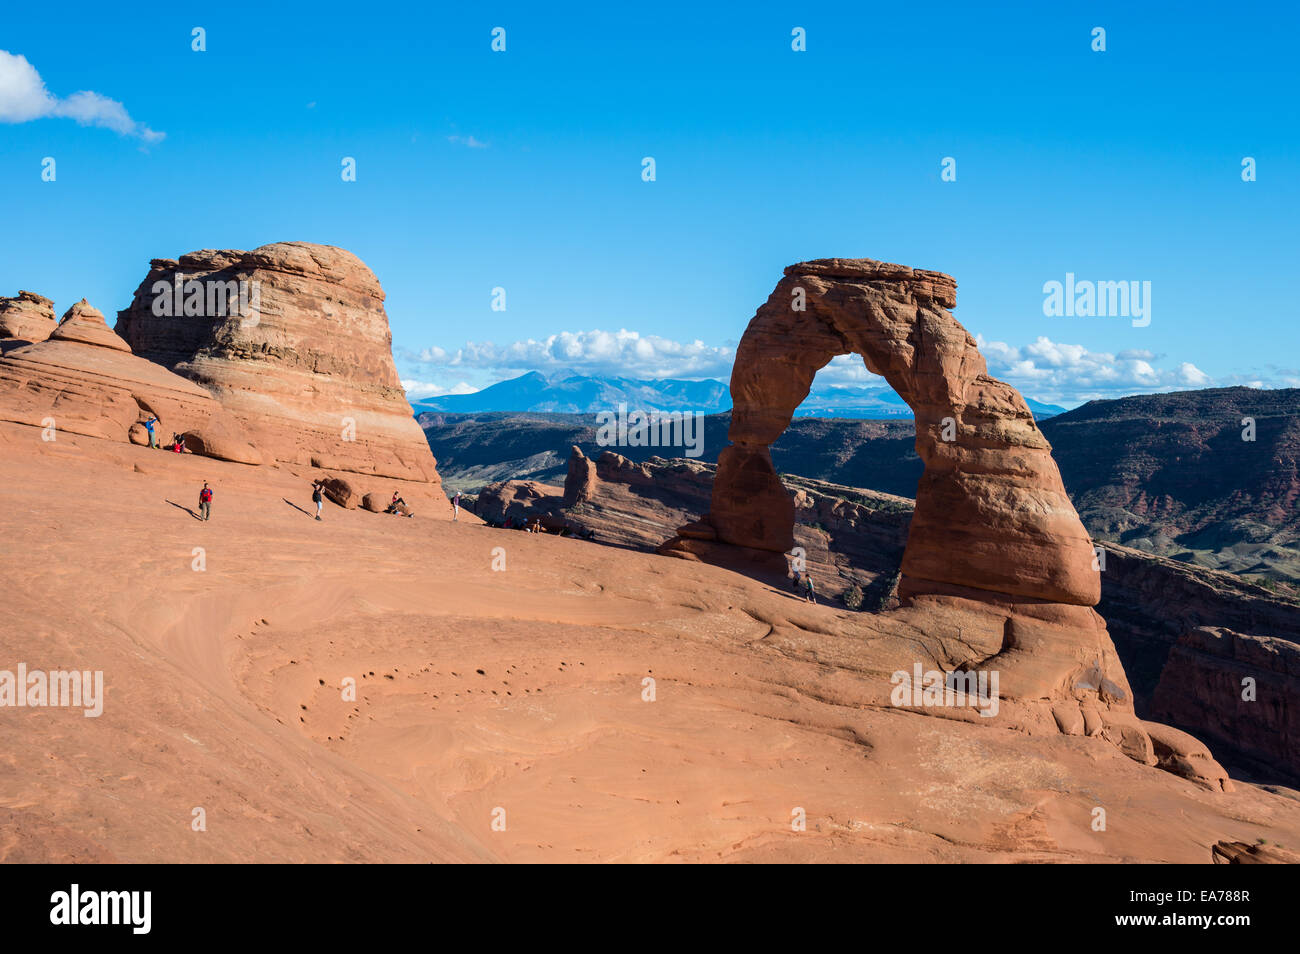 The Delicate Arch, a signature attraction of the Arches National Park, Utah, USA. Stock Photo